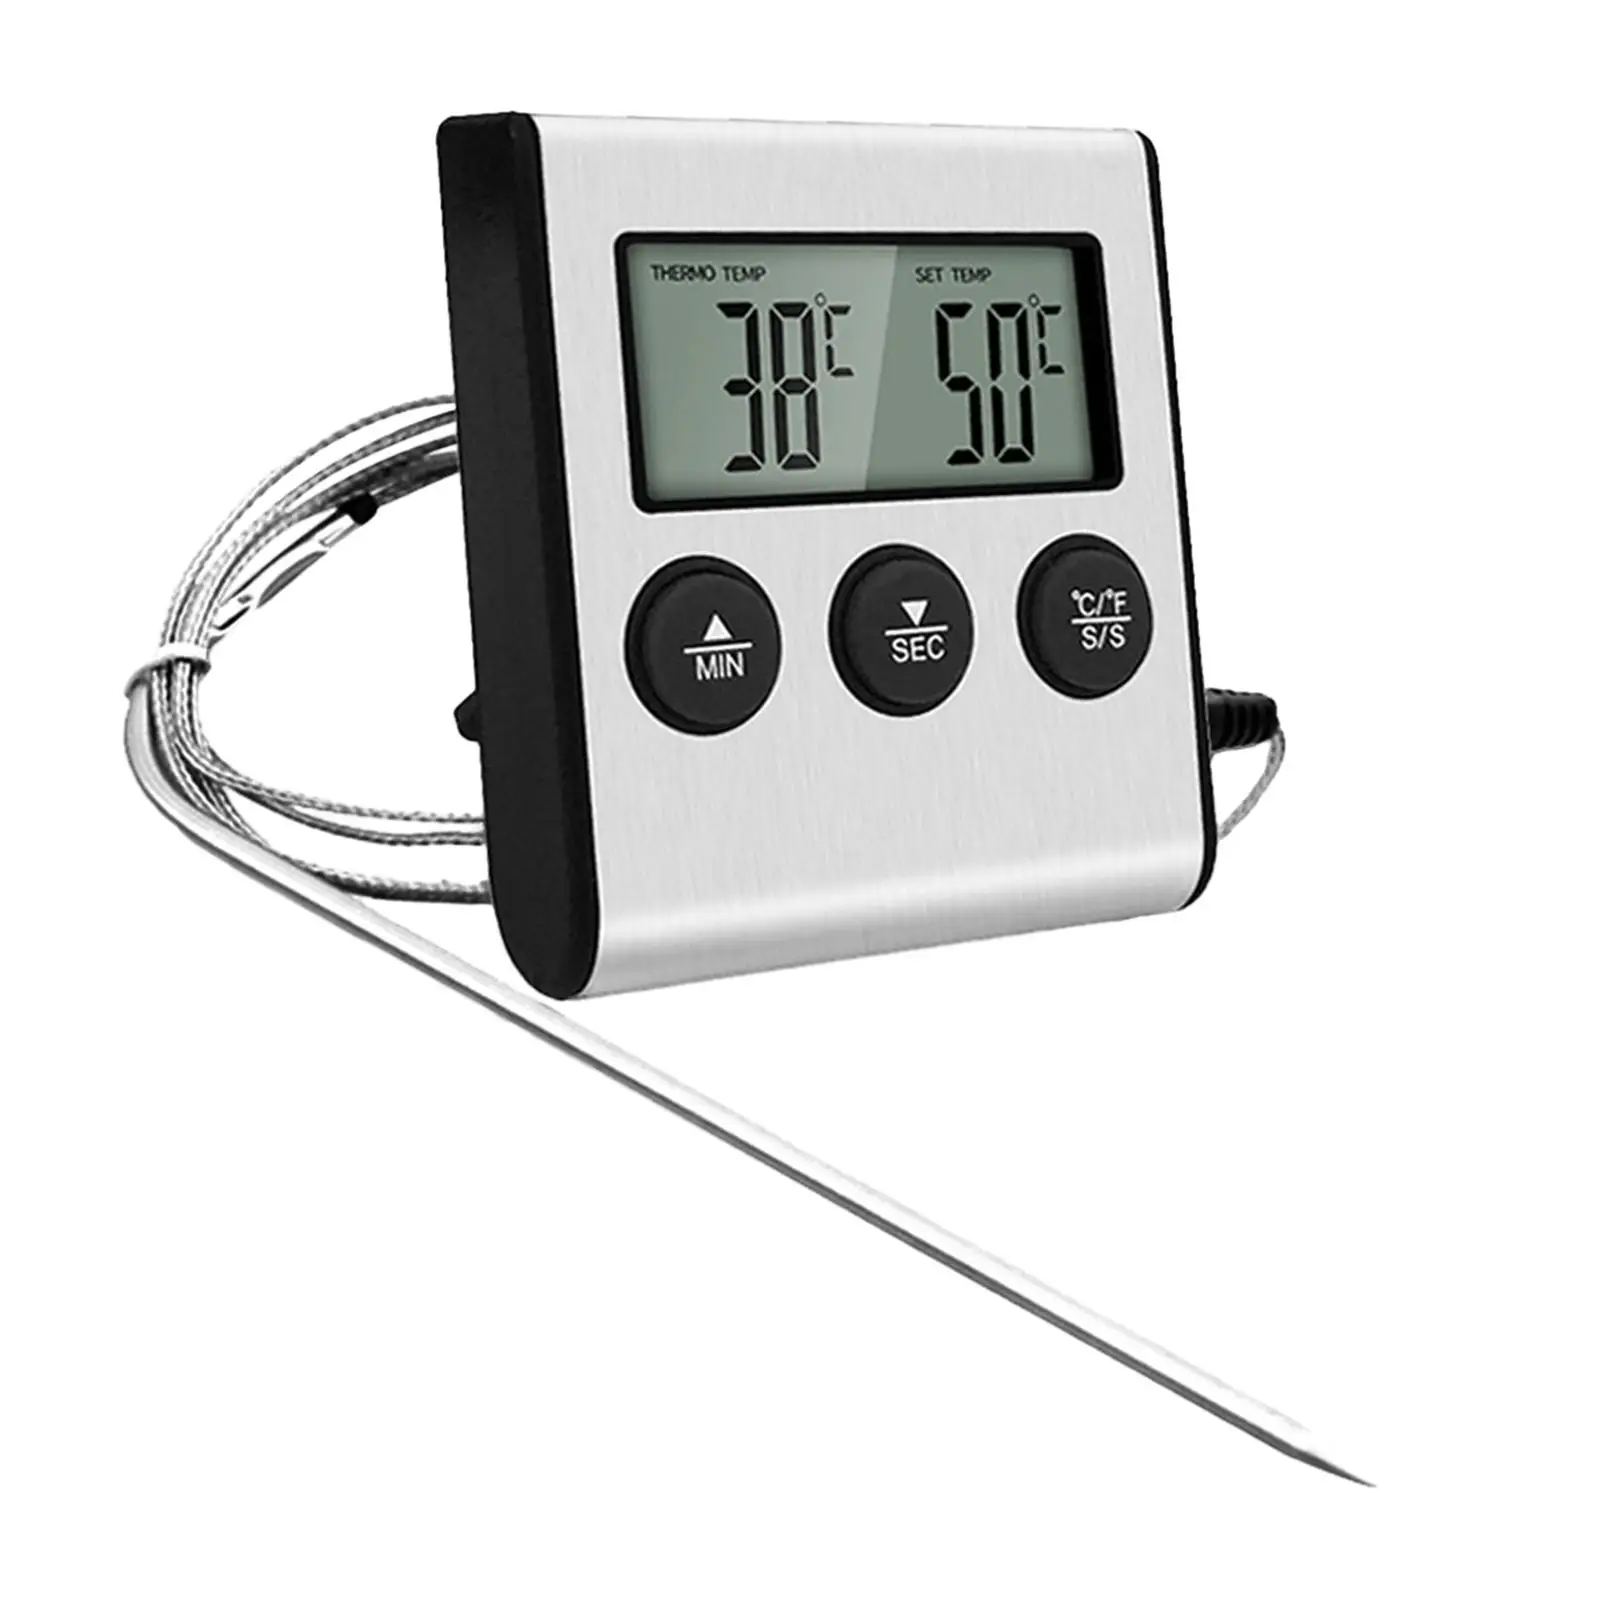 Cooking Thermometer LCD Backlight Instant Read Celsius/Fahrenheit Digital Meats Thermometer for BBQ Deep Fry Roast Oven Frying